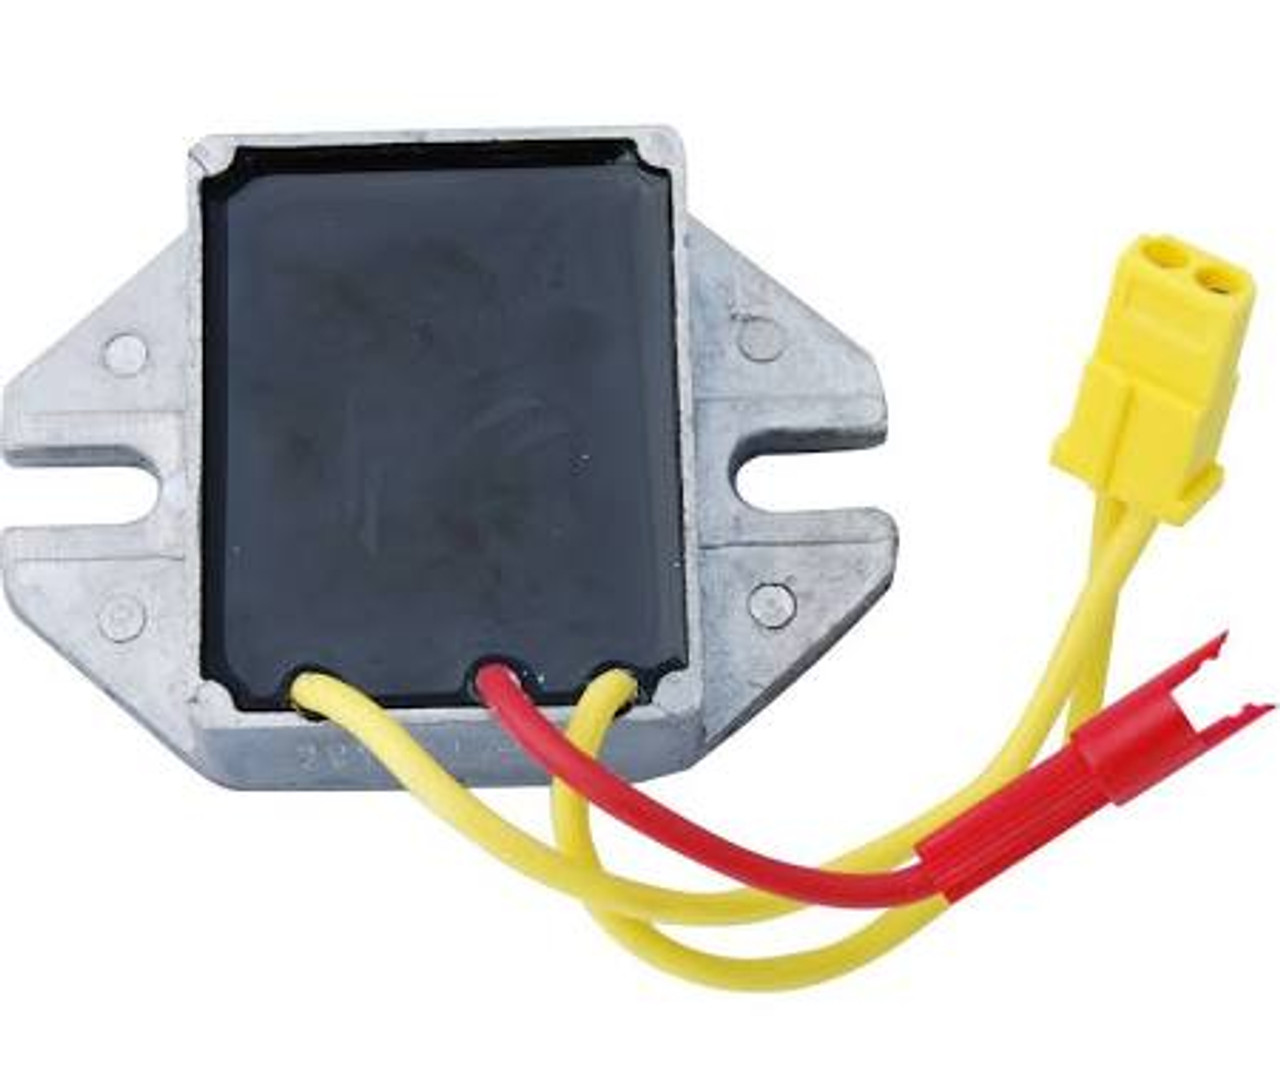 Briggs and Stratton 845907 12-Volt, pprox 5.5cm x 8cm. 2 Yellow leads with rectangular connector, Red lead with round connector
Genuine Briggs & Stratton Voltage Regulator
Fits select 202000 Briggs & Stratton Engines
Replaces Old Briggs # 797375, 691185, 394890, 393374
New OEM replacement part